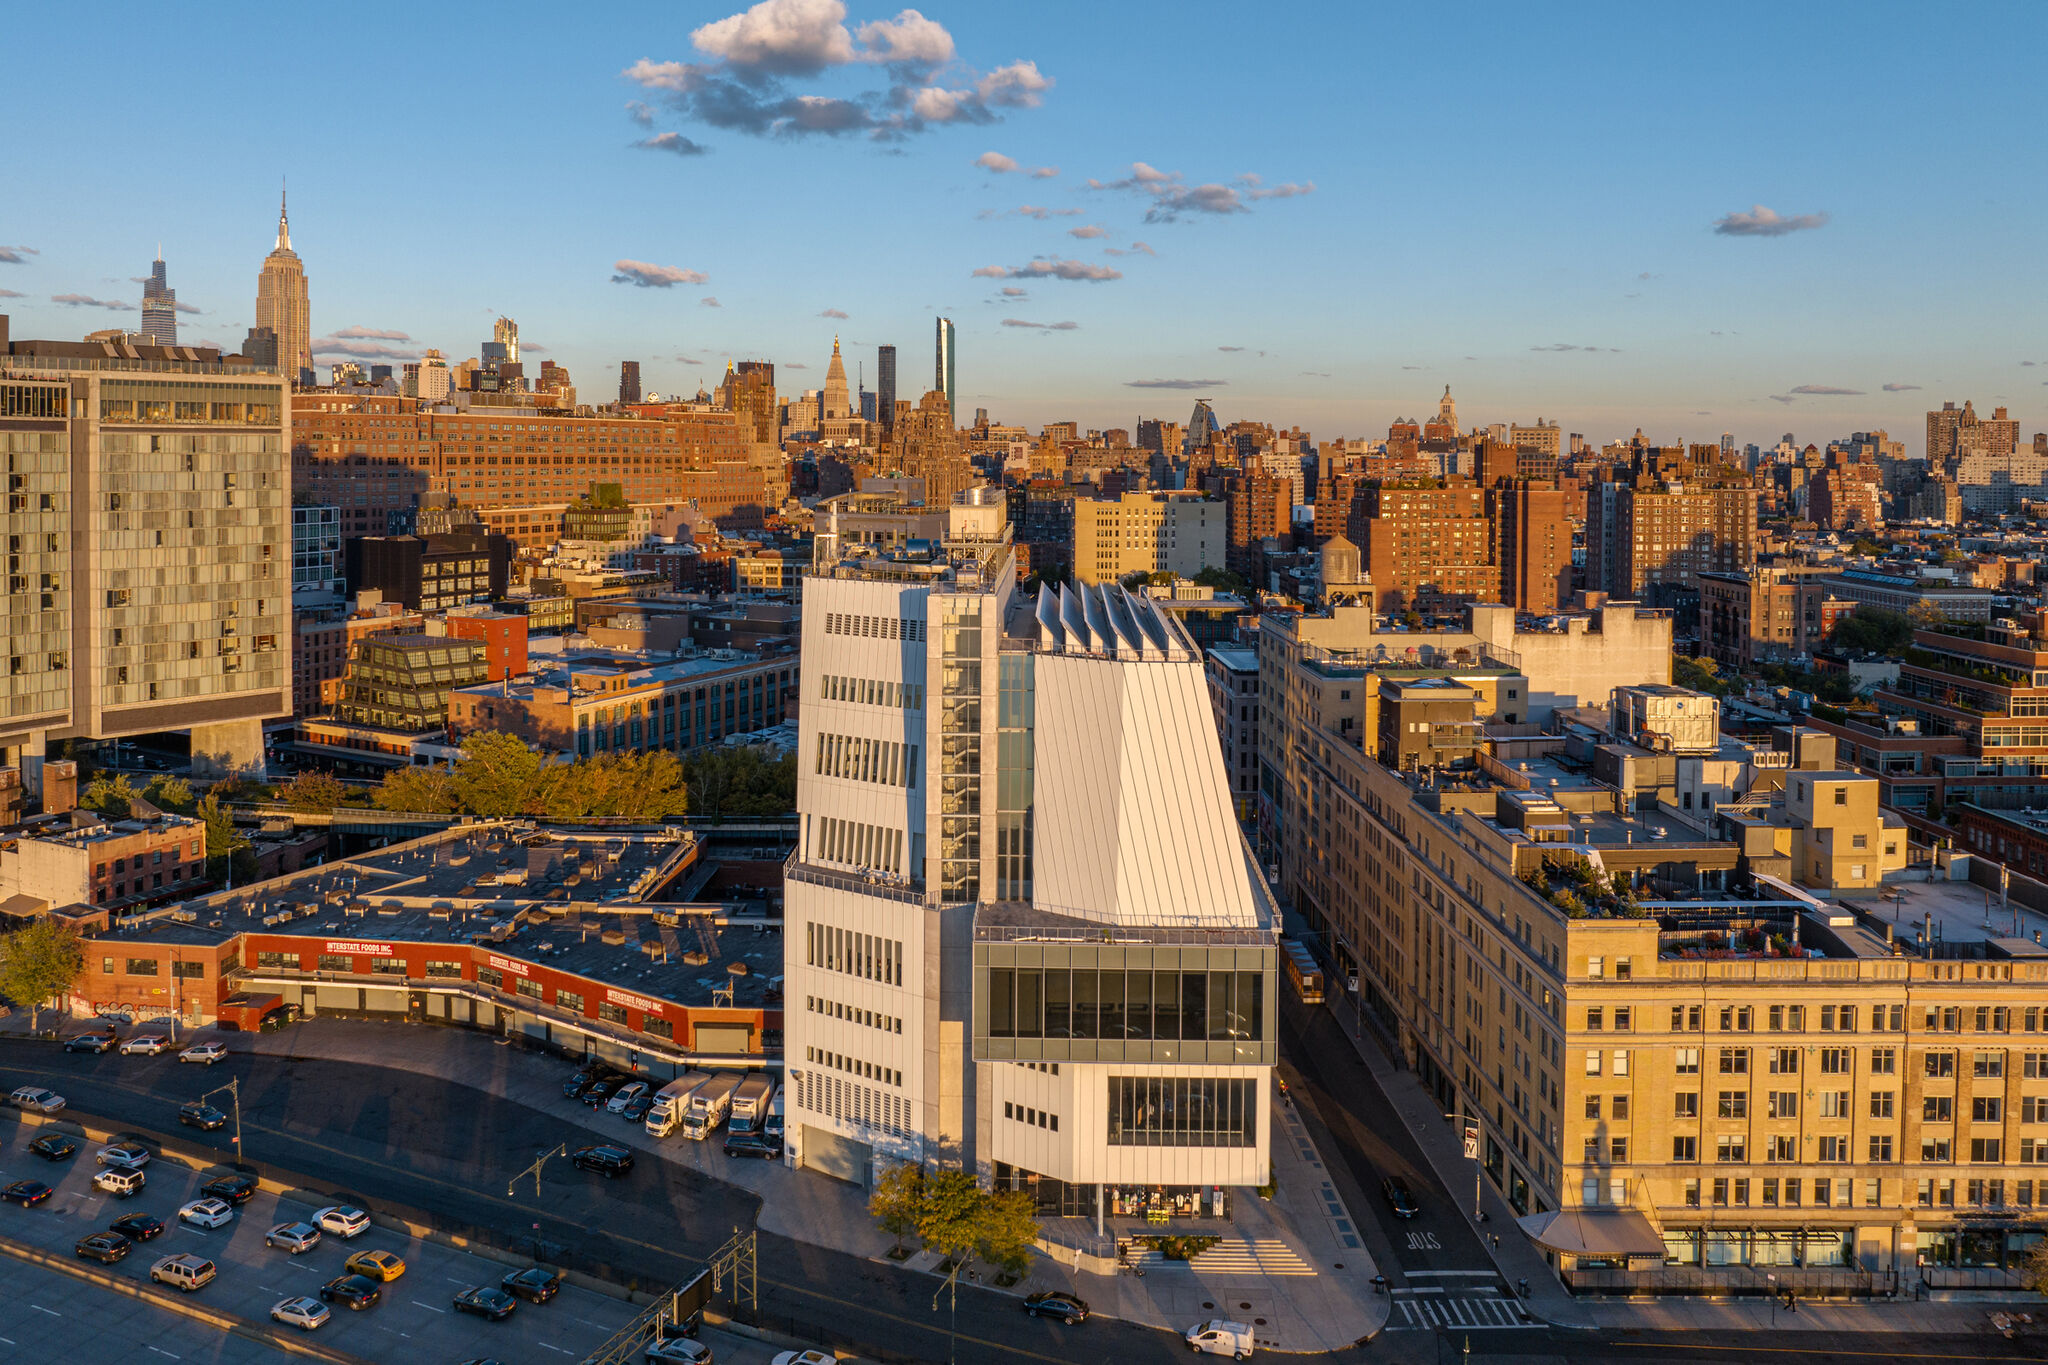 Aerial view of the Whitney Museum of American Art, a modern building with unique architecture, against a cityscape.